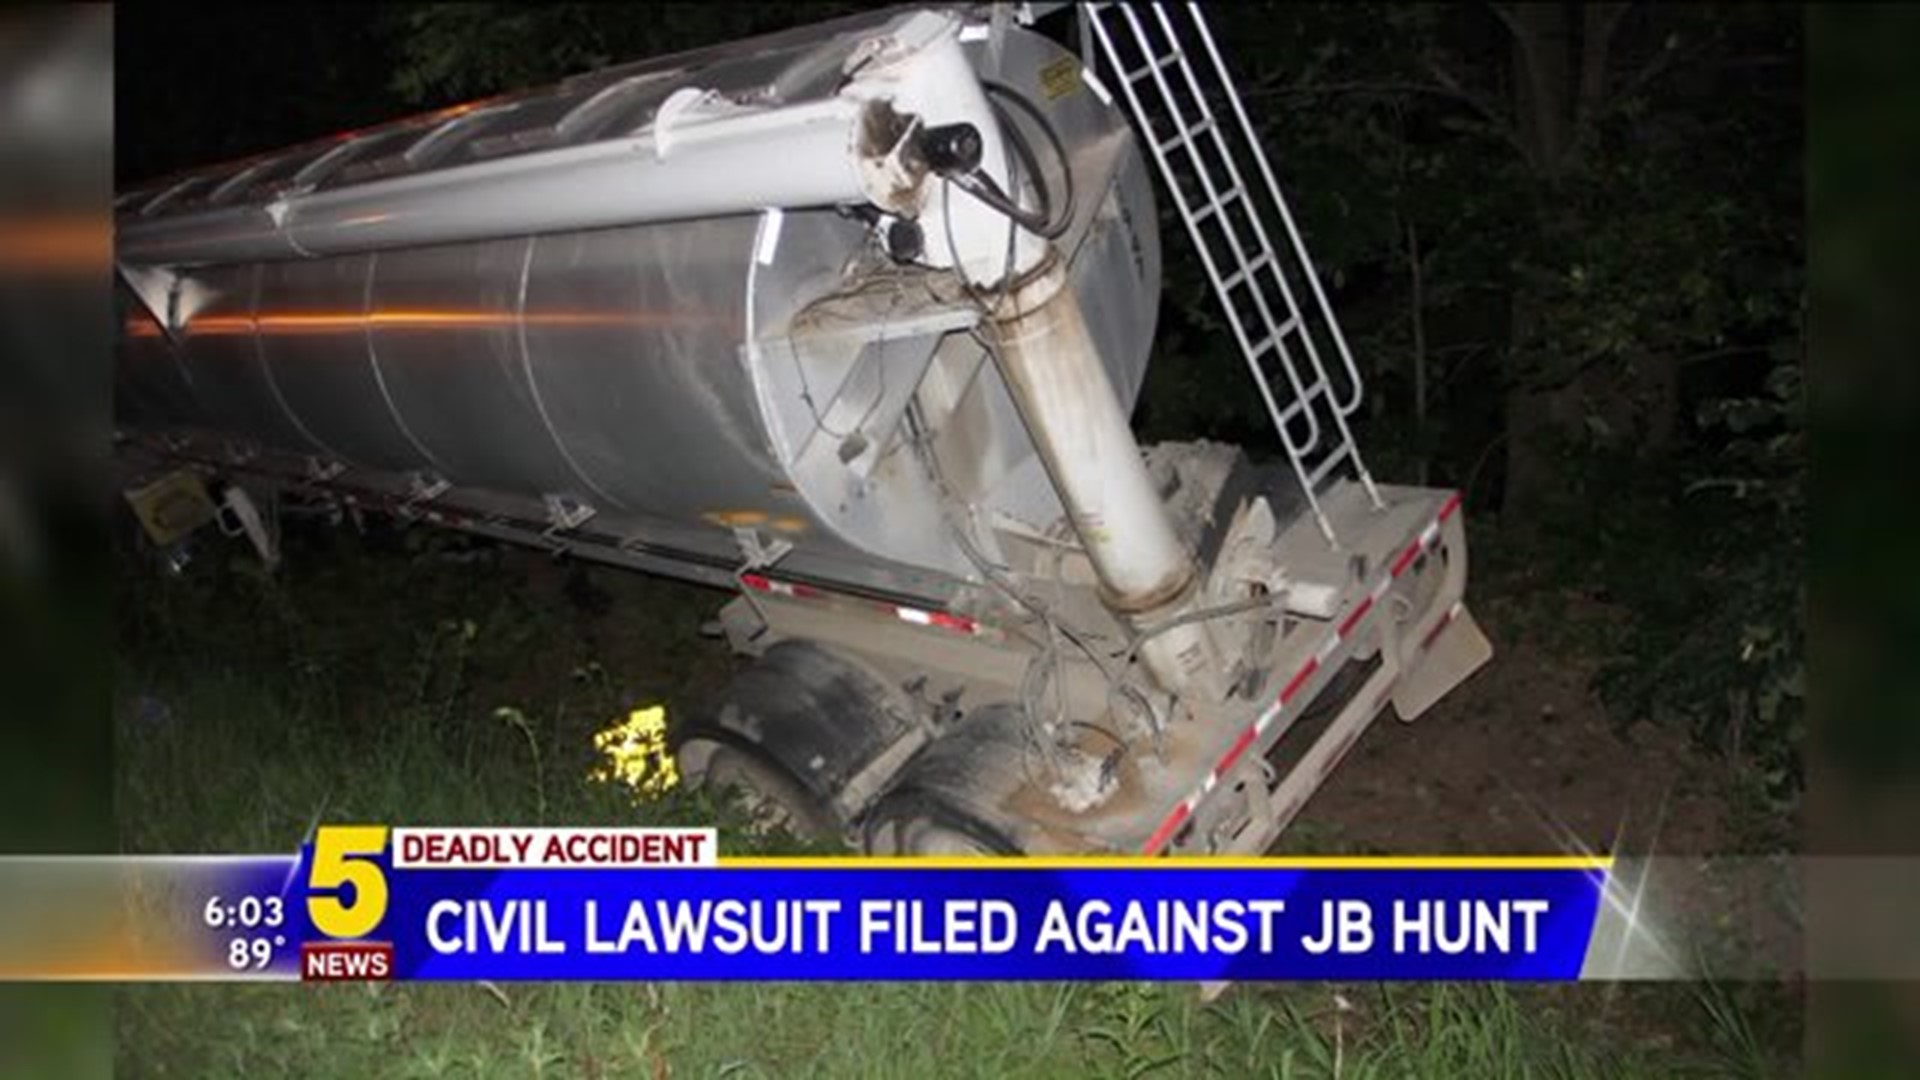 Lawsuit Filed Against JB Hunt In Deadly Accident